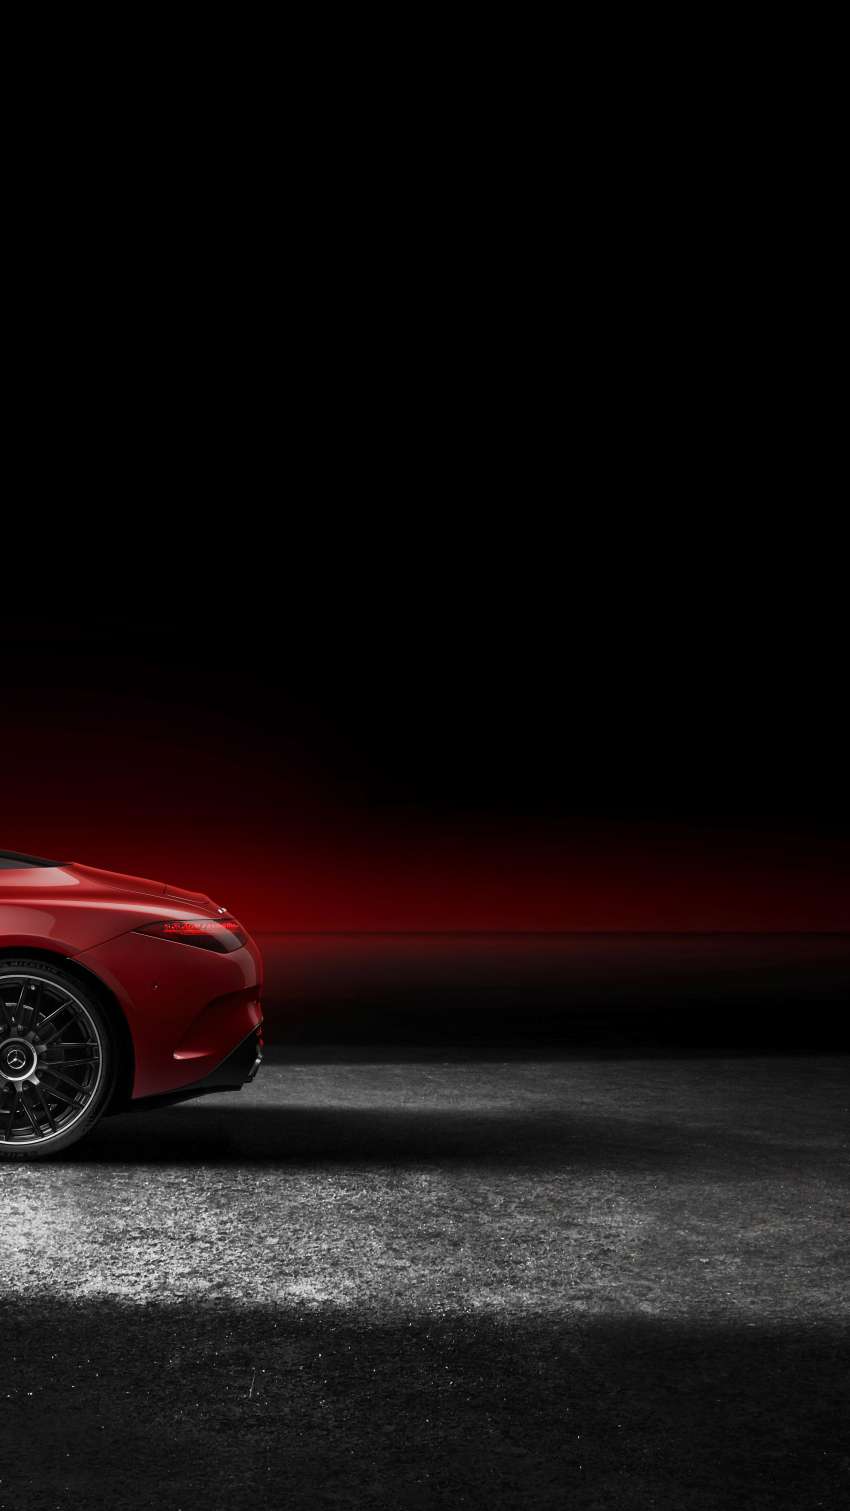 2022 Mercedes-AMG SL revealed – R232 developed by Affalterbach, 476 PS SL55, 585 PS SL63, PHEV later Image #1369271